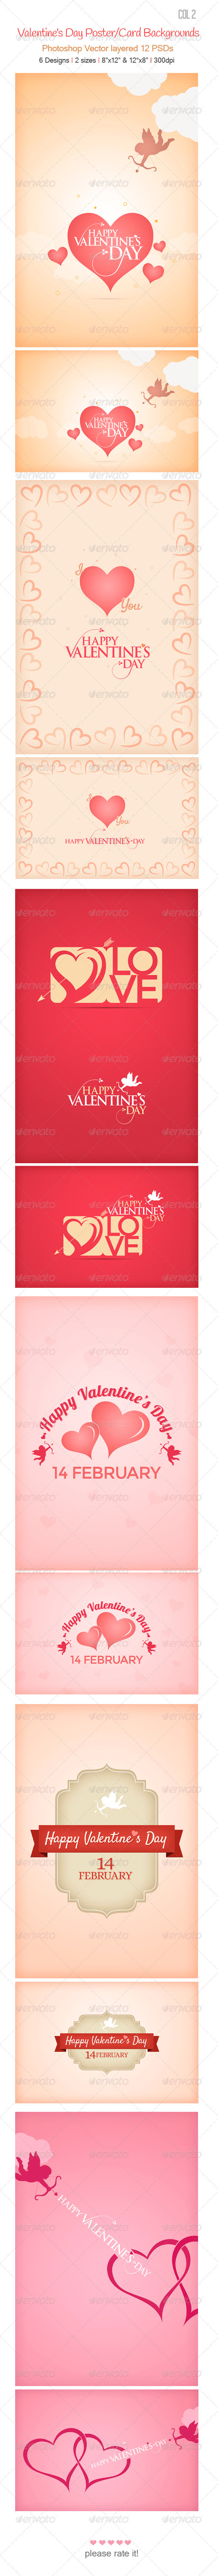 Valentine's Day Backgrounds col 2